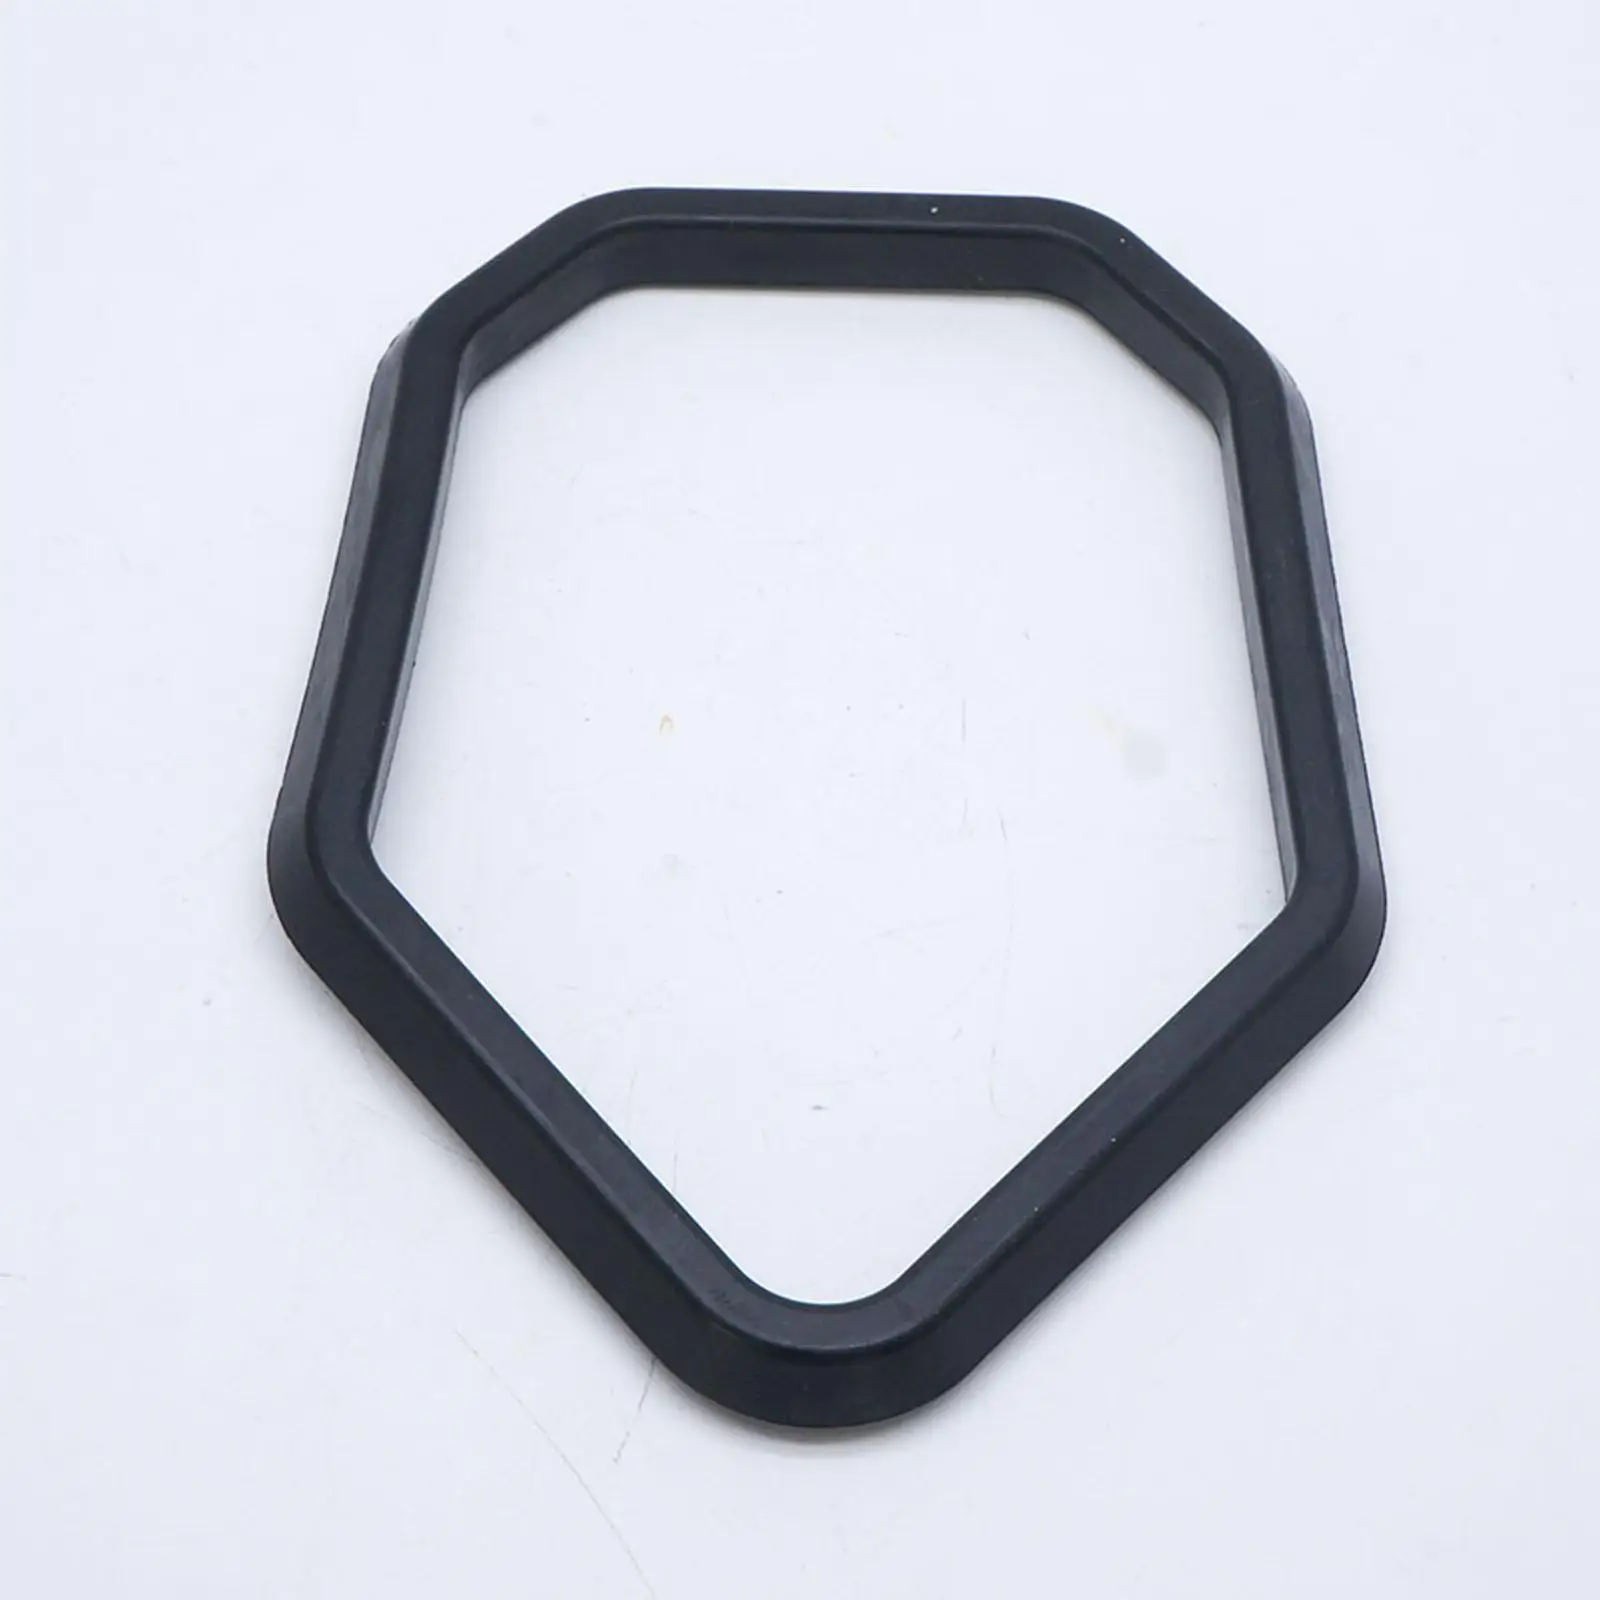 6E5-45123 New Gasket Replacement Fits for Outboard Motor 115 250HP 6E5-45123-00 Boat Parts